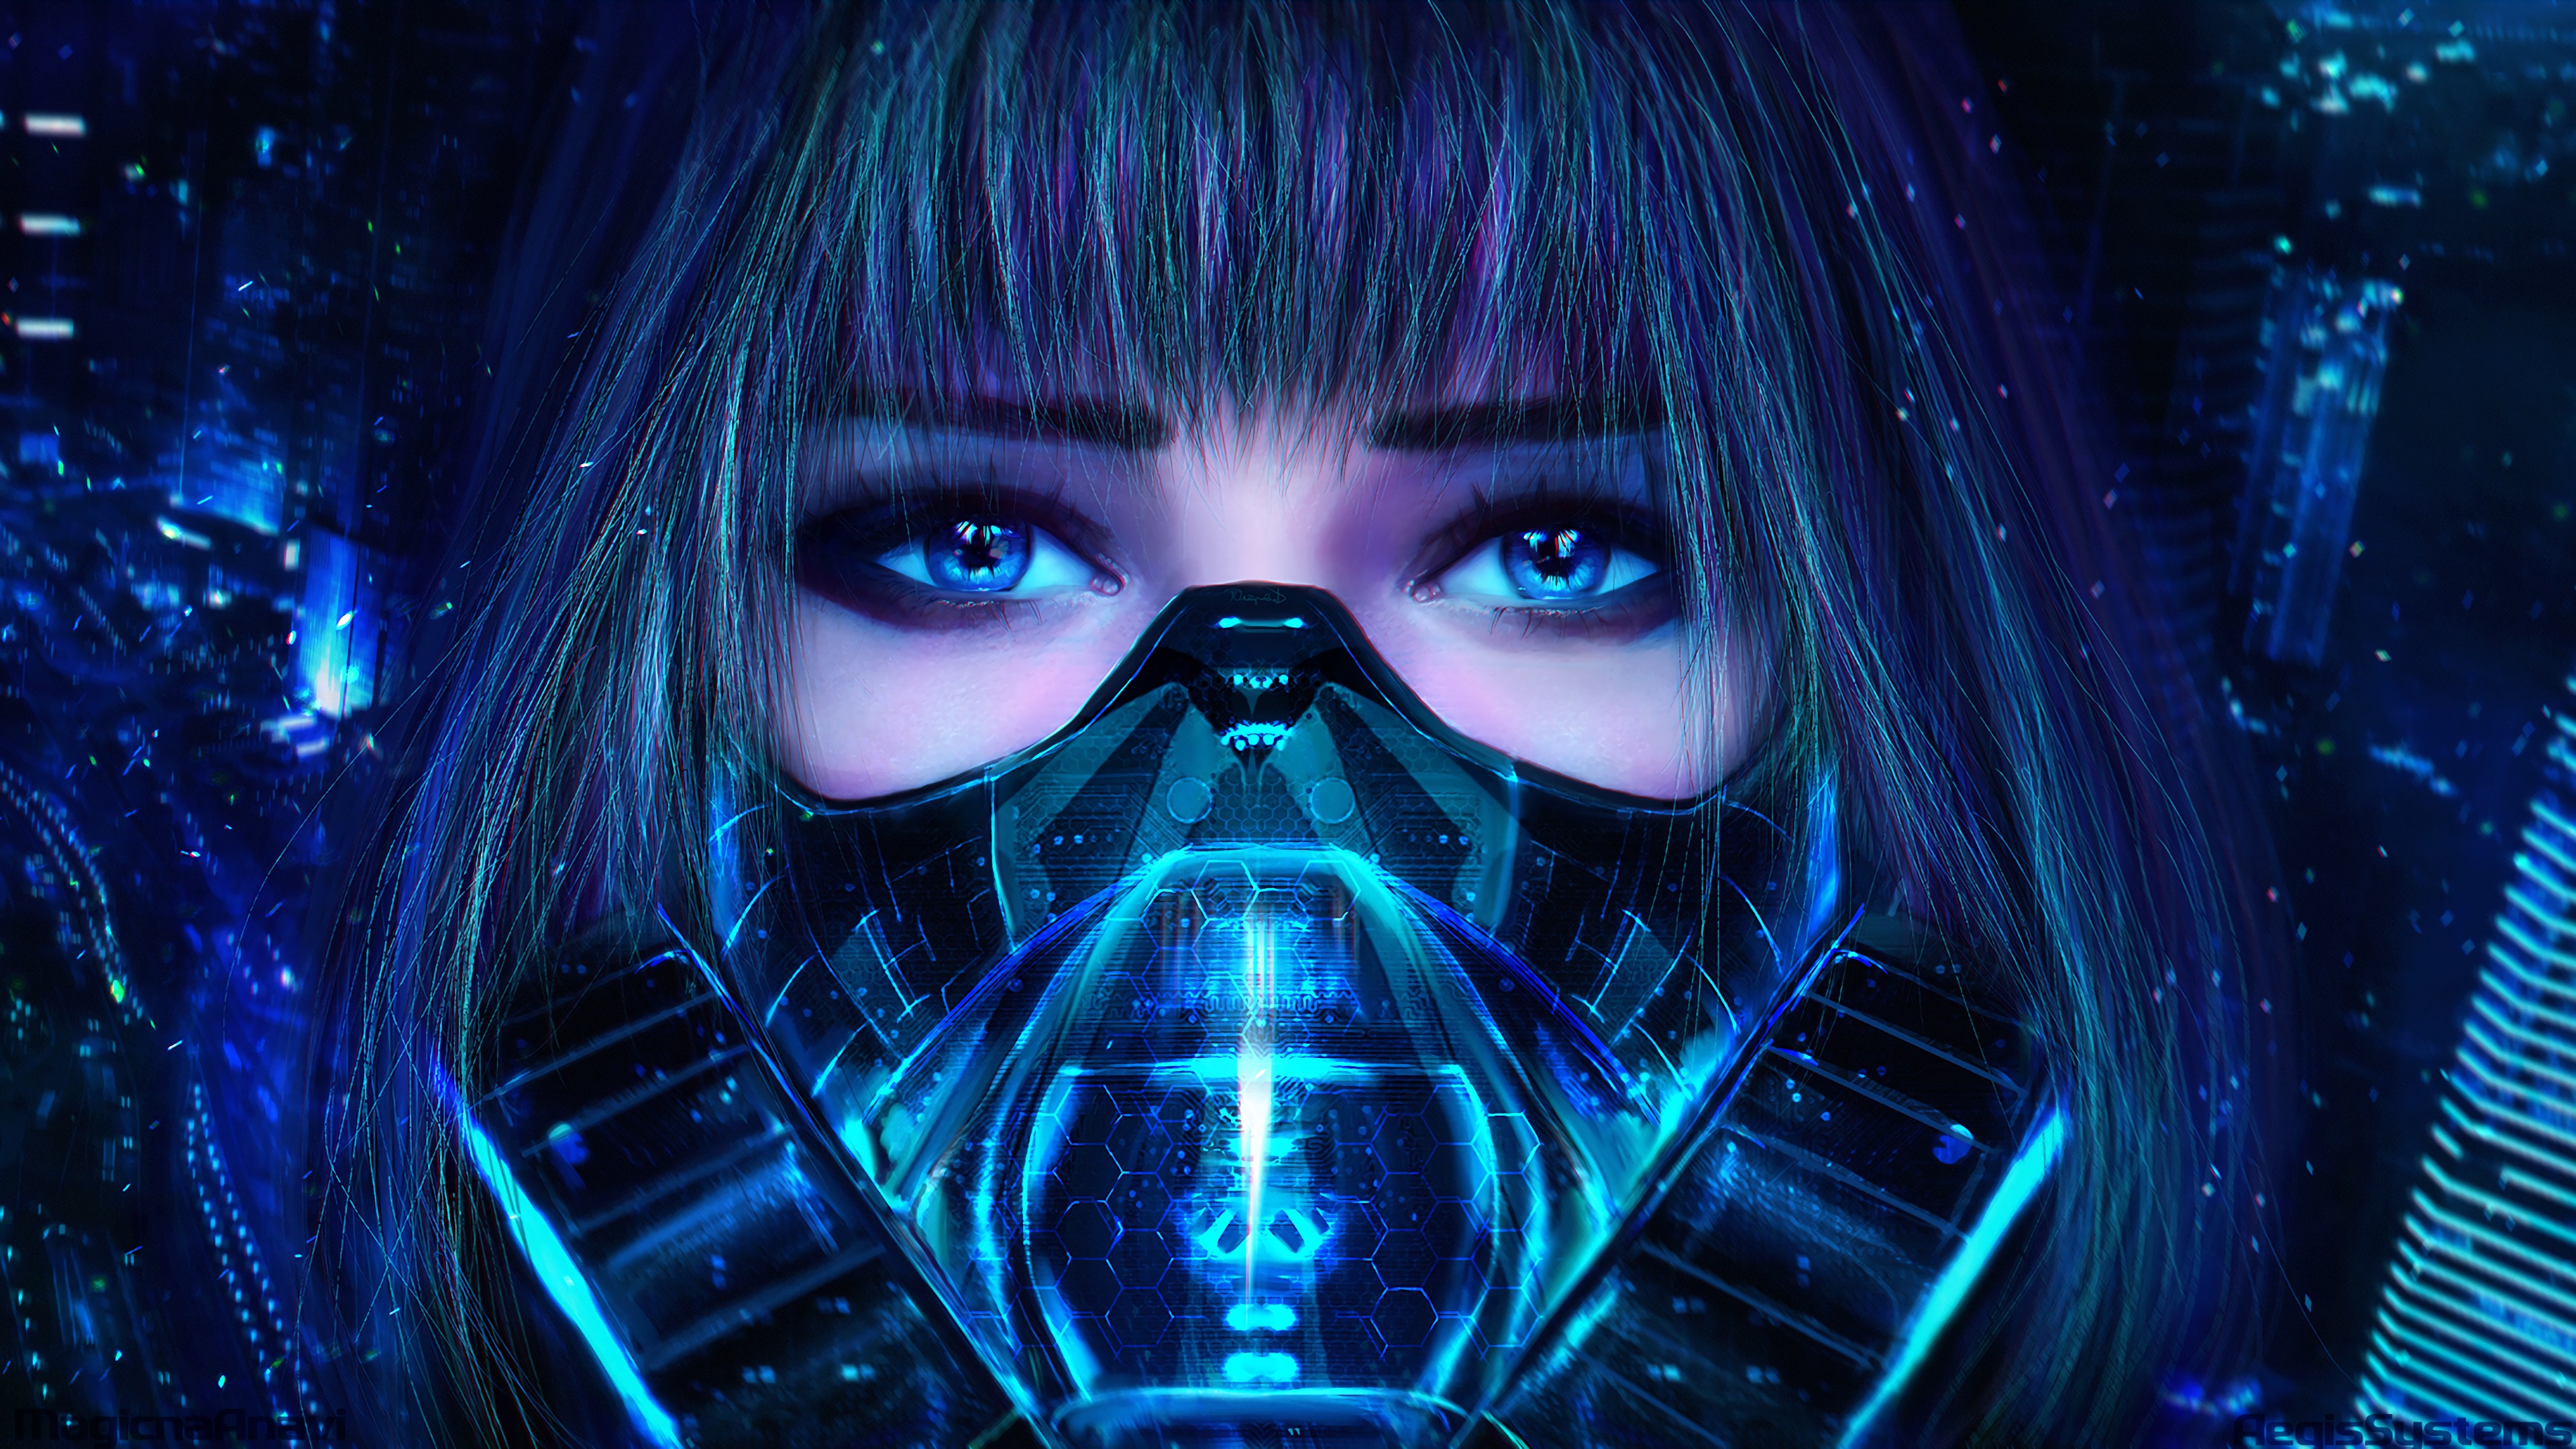 Futuristic Science Fiction Women Mask MagicnaAnavi Blue Eyes Looking At Viewer 3840x2160